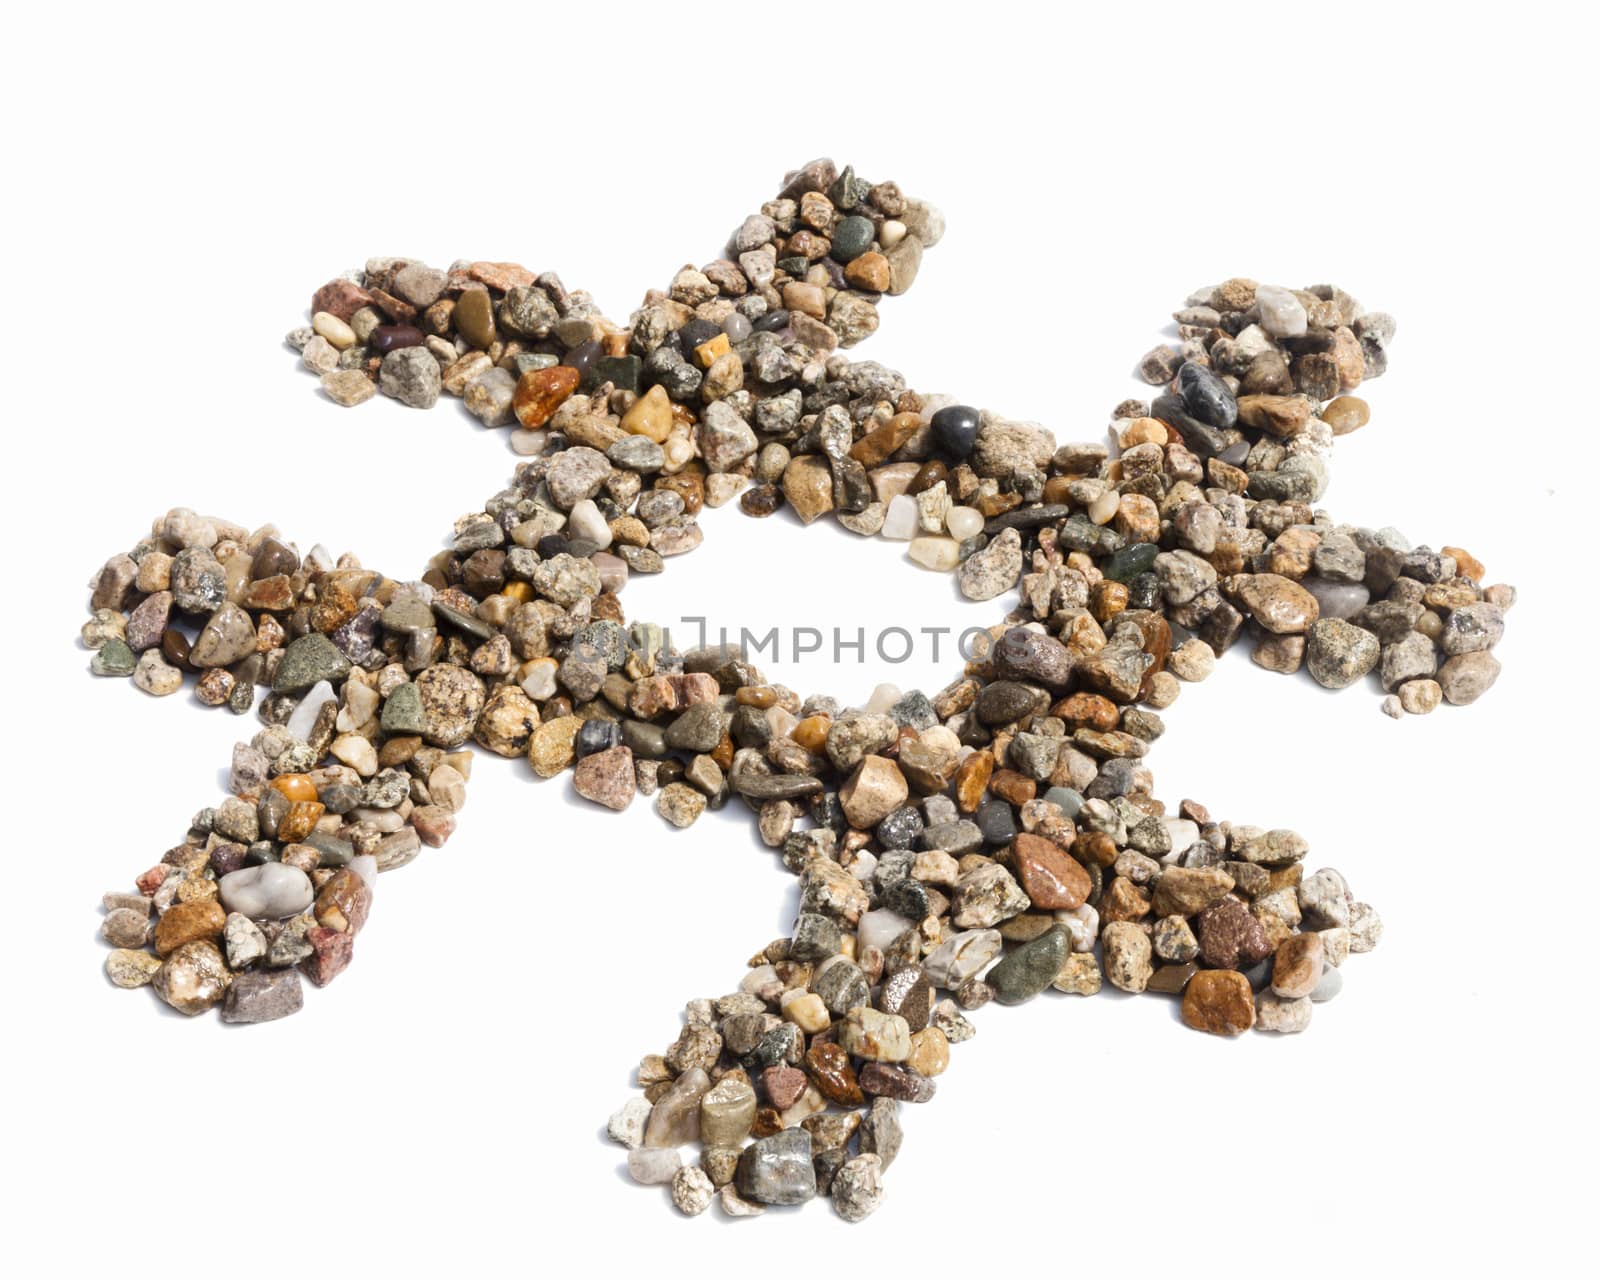 A hashtag symbol made pebbles against a white background.